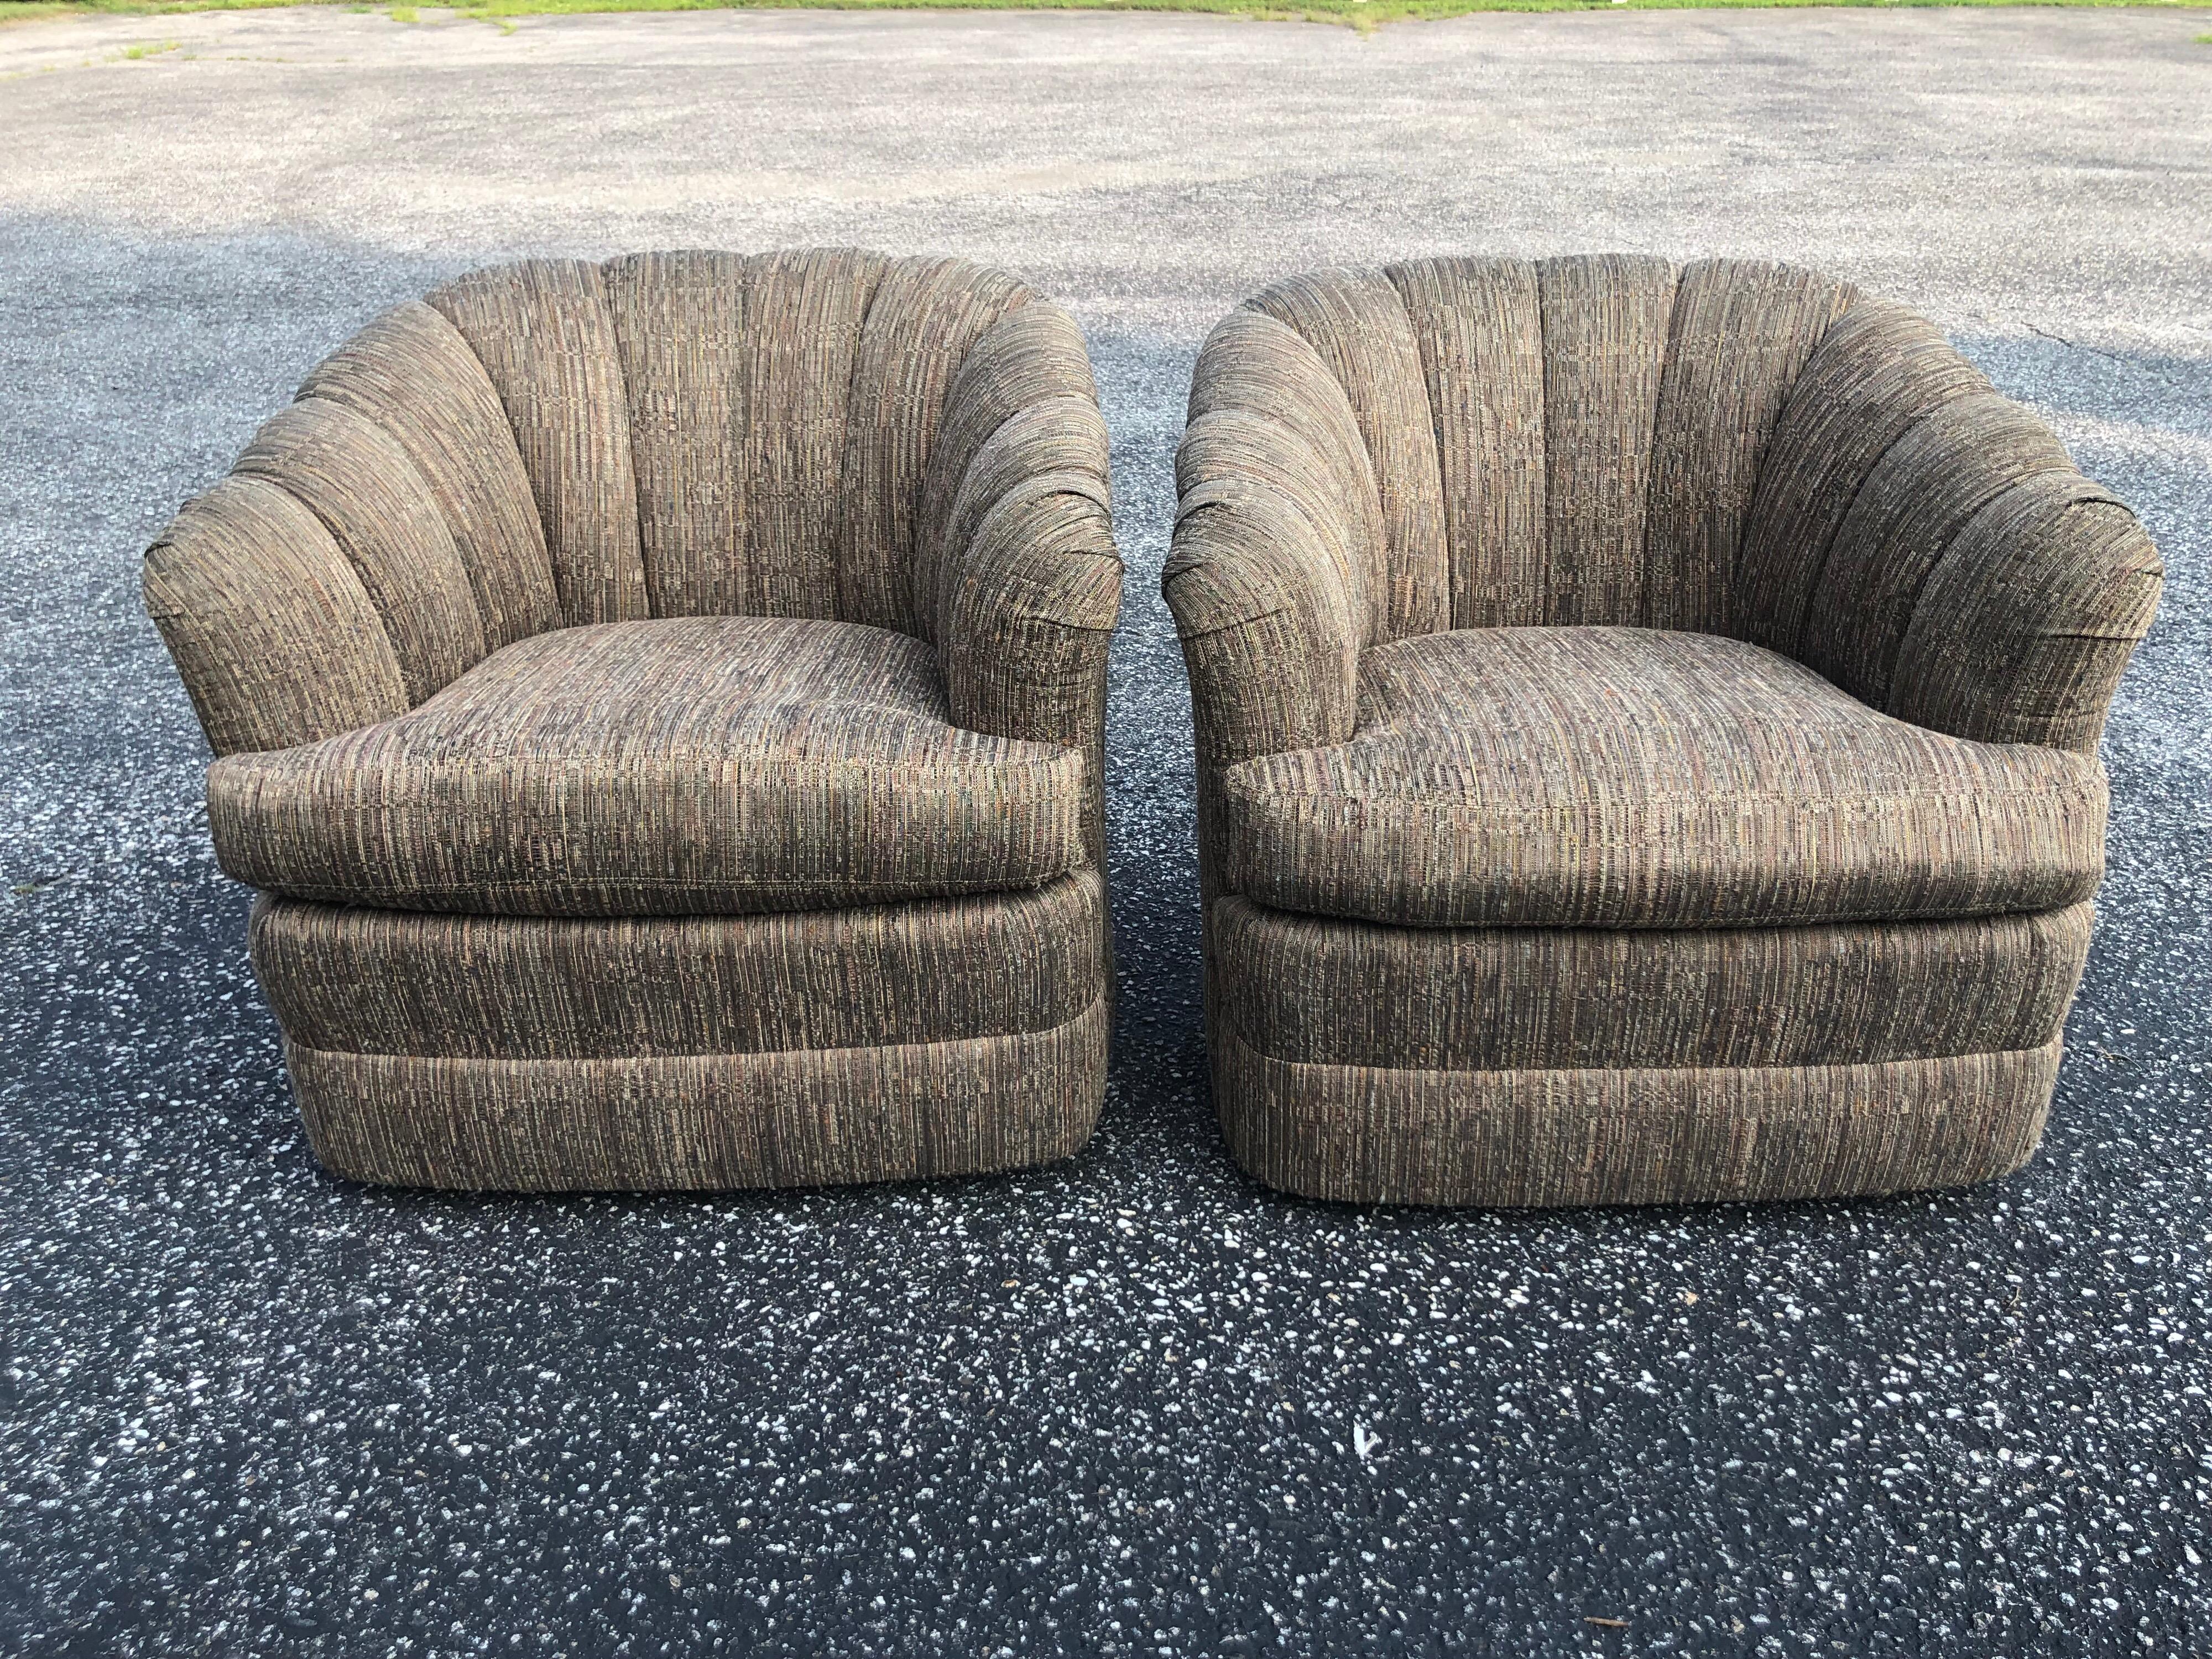 Pair of Textured Silver Gray Swivel chairs by Ethan Allen. Nice jeweled earth toned upholstery. In excellent condition. Price is for pair. Measures: Seat width is 18, seat depth is 18. Arm height is 22-24. Seat height is 18.50. Total depth is 29.